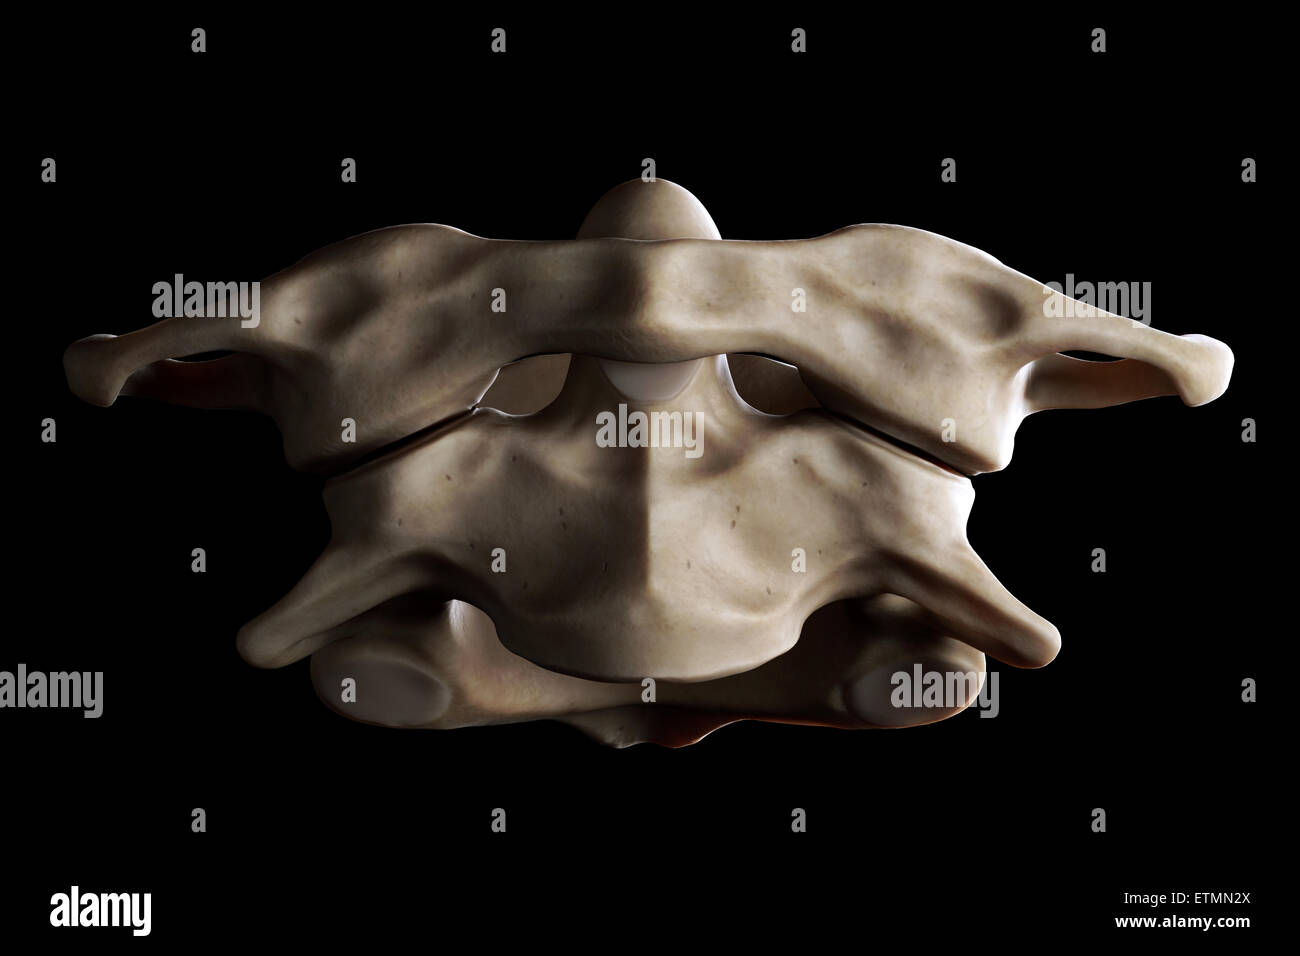 Illustration showing the atlas and axis vertebrae of the neck. Stock Photo